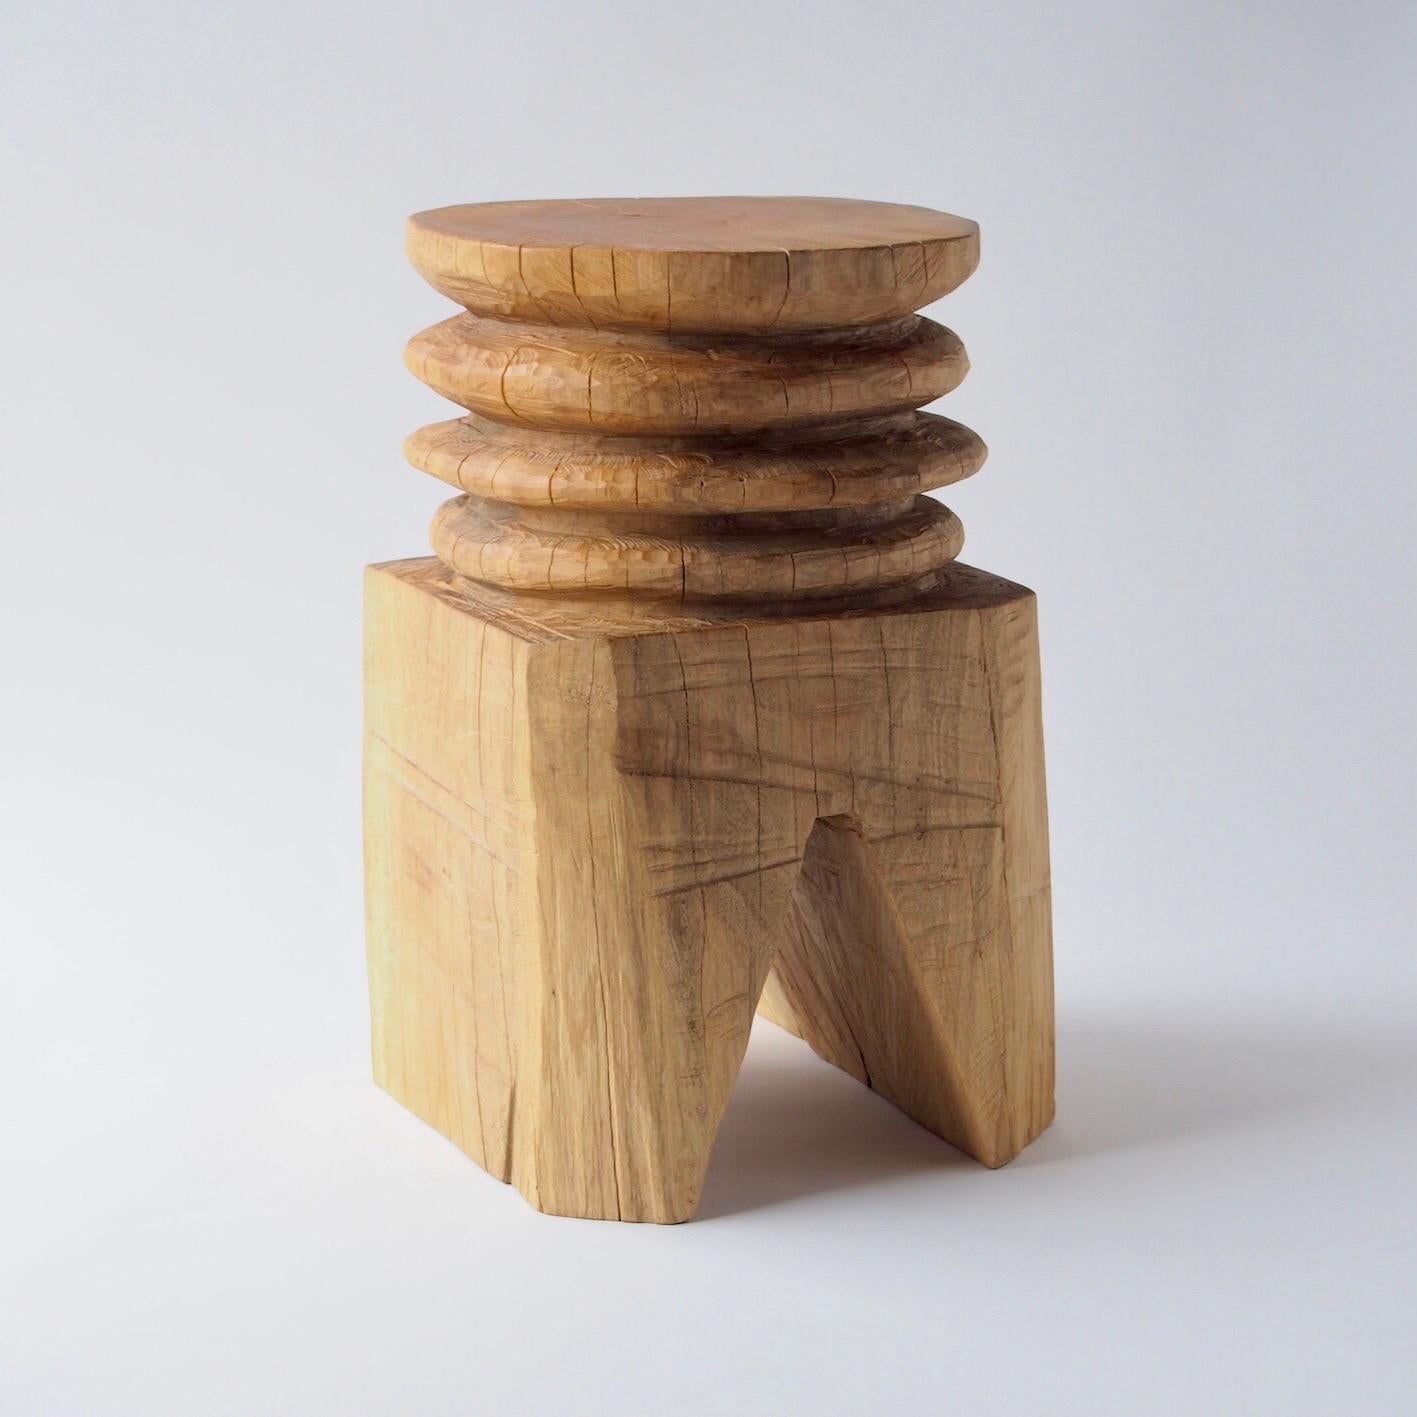 Name: Pancake
Sculptural stool by Zogei carved furniture
Material: Zelkova
This work is carved from log with some kinds of chainsaws.
Most of wood used for Nishimura's works are unable to use anything, these woods are unsuitable material for